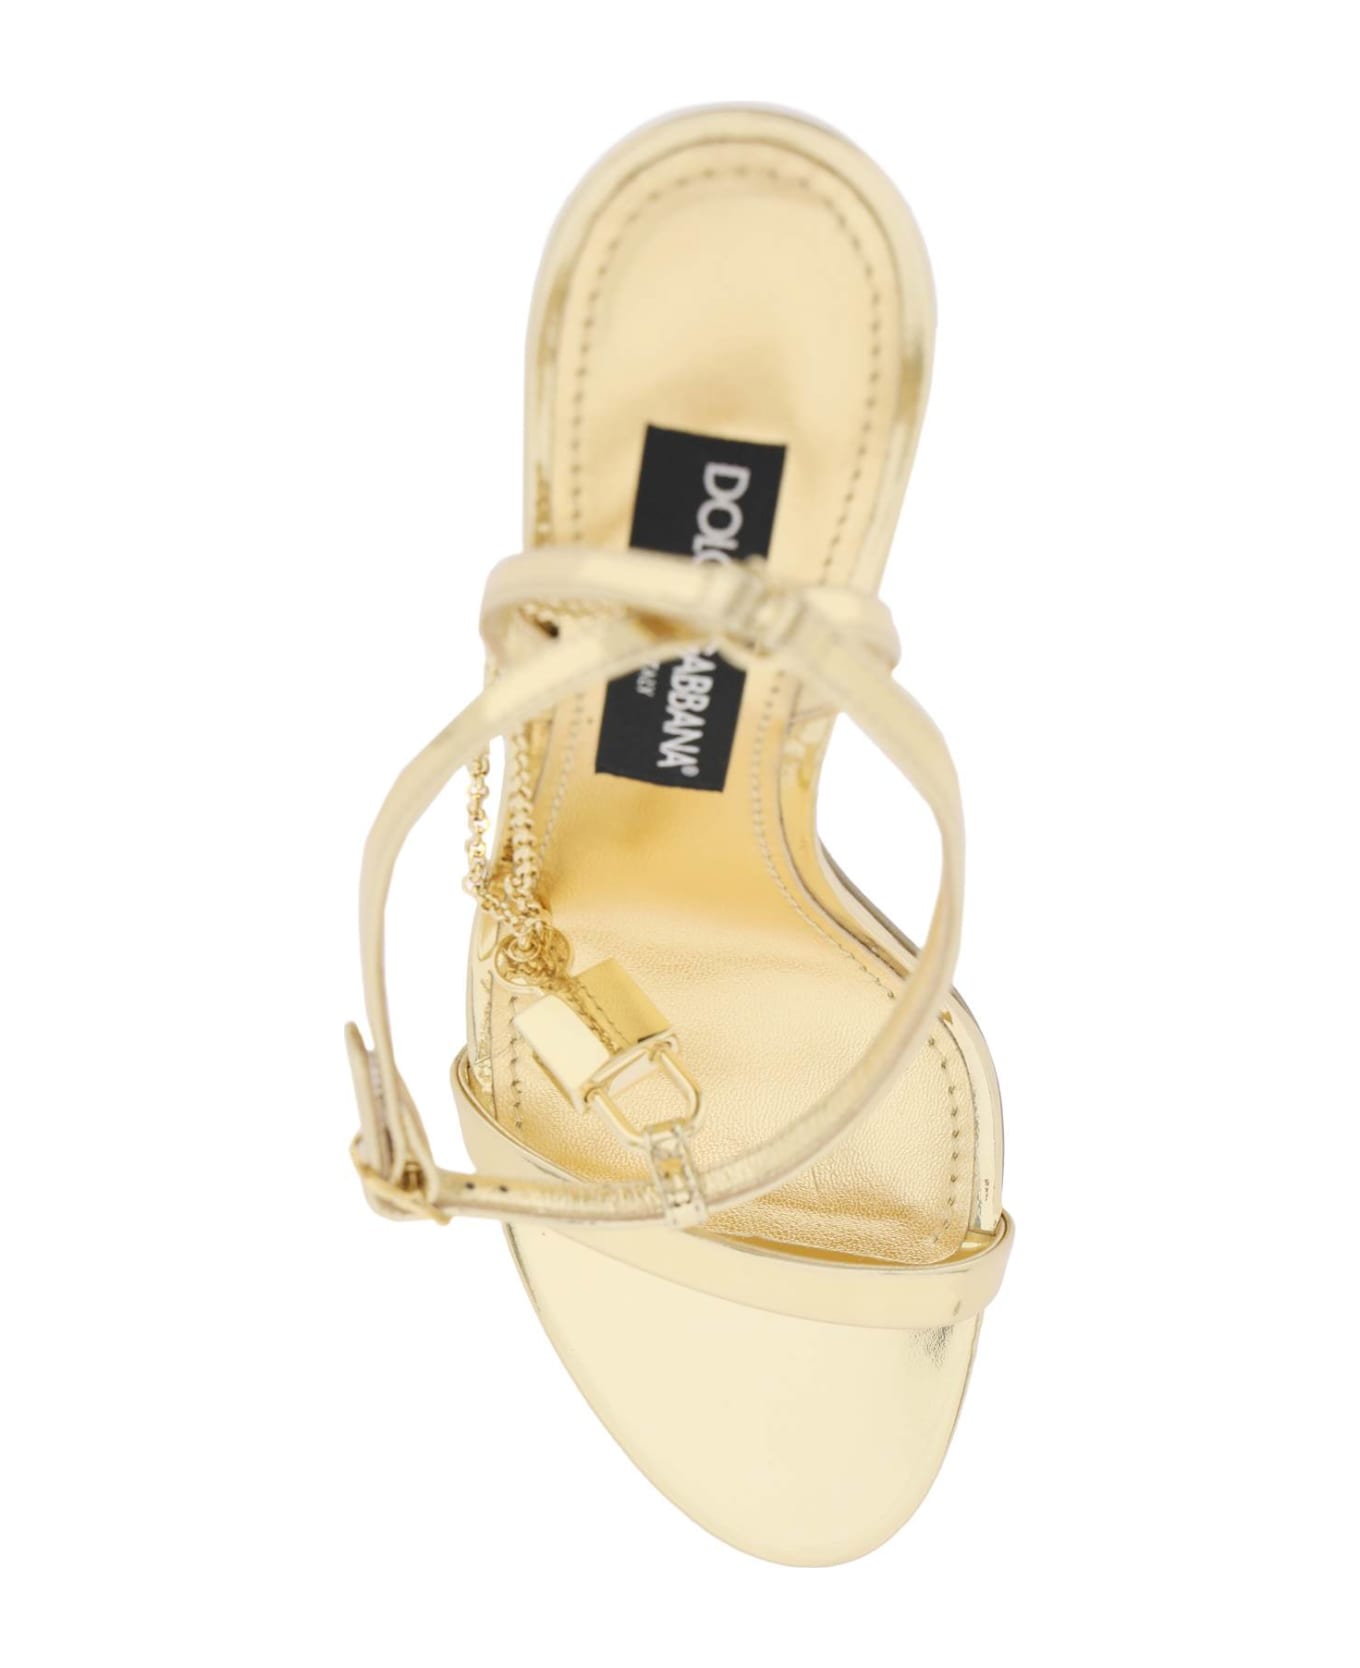 Dolce & Gabbana Leather Sandals - ORO CHAMPAGNE (Gold)